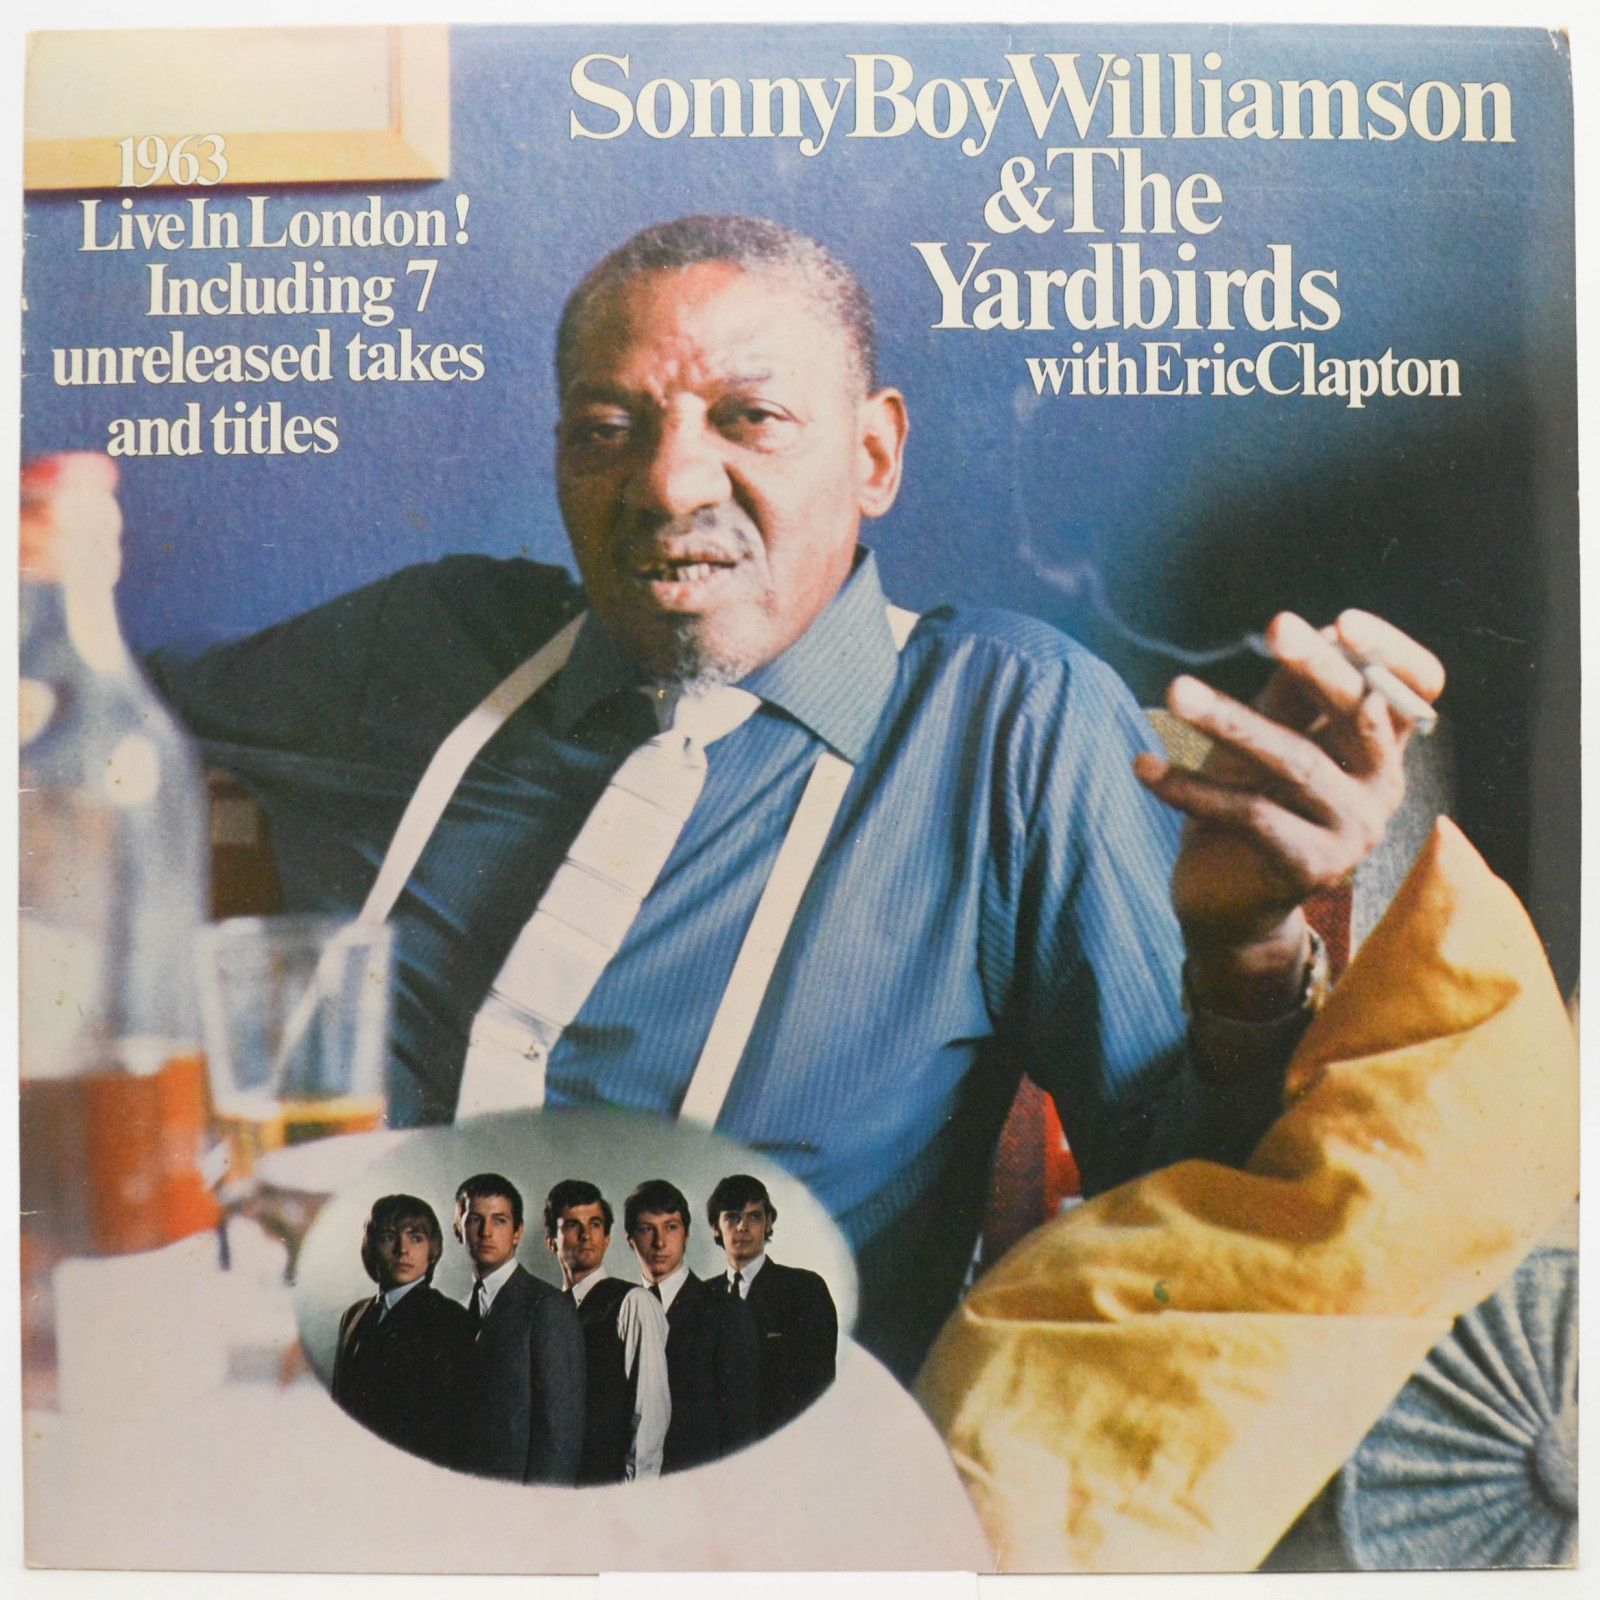 Sonny Boy Williamson & The Yardbirds With Eric Clapton — 1963 Live In London! (Including 7 Unreleased Takes And Titles), 1965